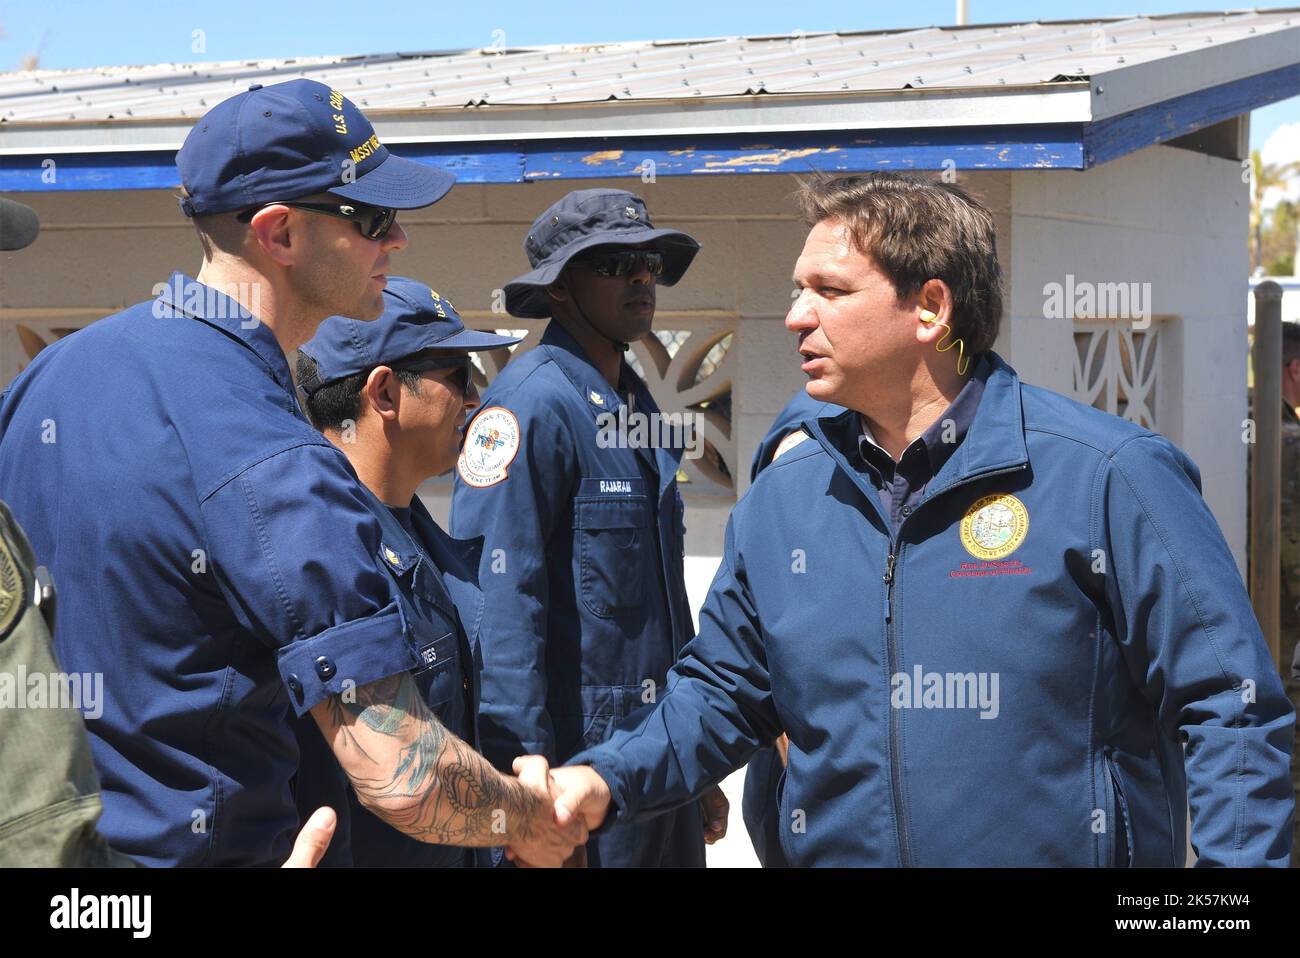 Pine Island, United States. 04th Oct, 2022. Coast Guard Lt. Nicholas Haas, left, shakes hands with Florida Governor Ron. DeSantis, during recovery work in the aftermath of Hurricane Ian, October 4, 2022 in Pine Island, Florida. Credit: PO2 Brandon Hillard/US Coast Guard/Alamy Live News Stock Photo